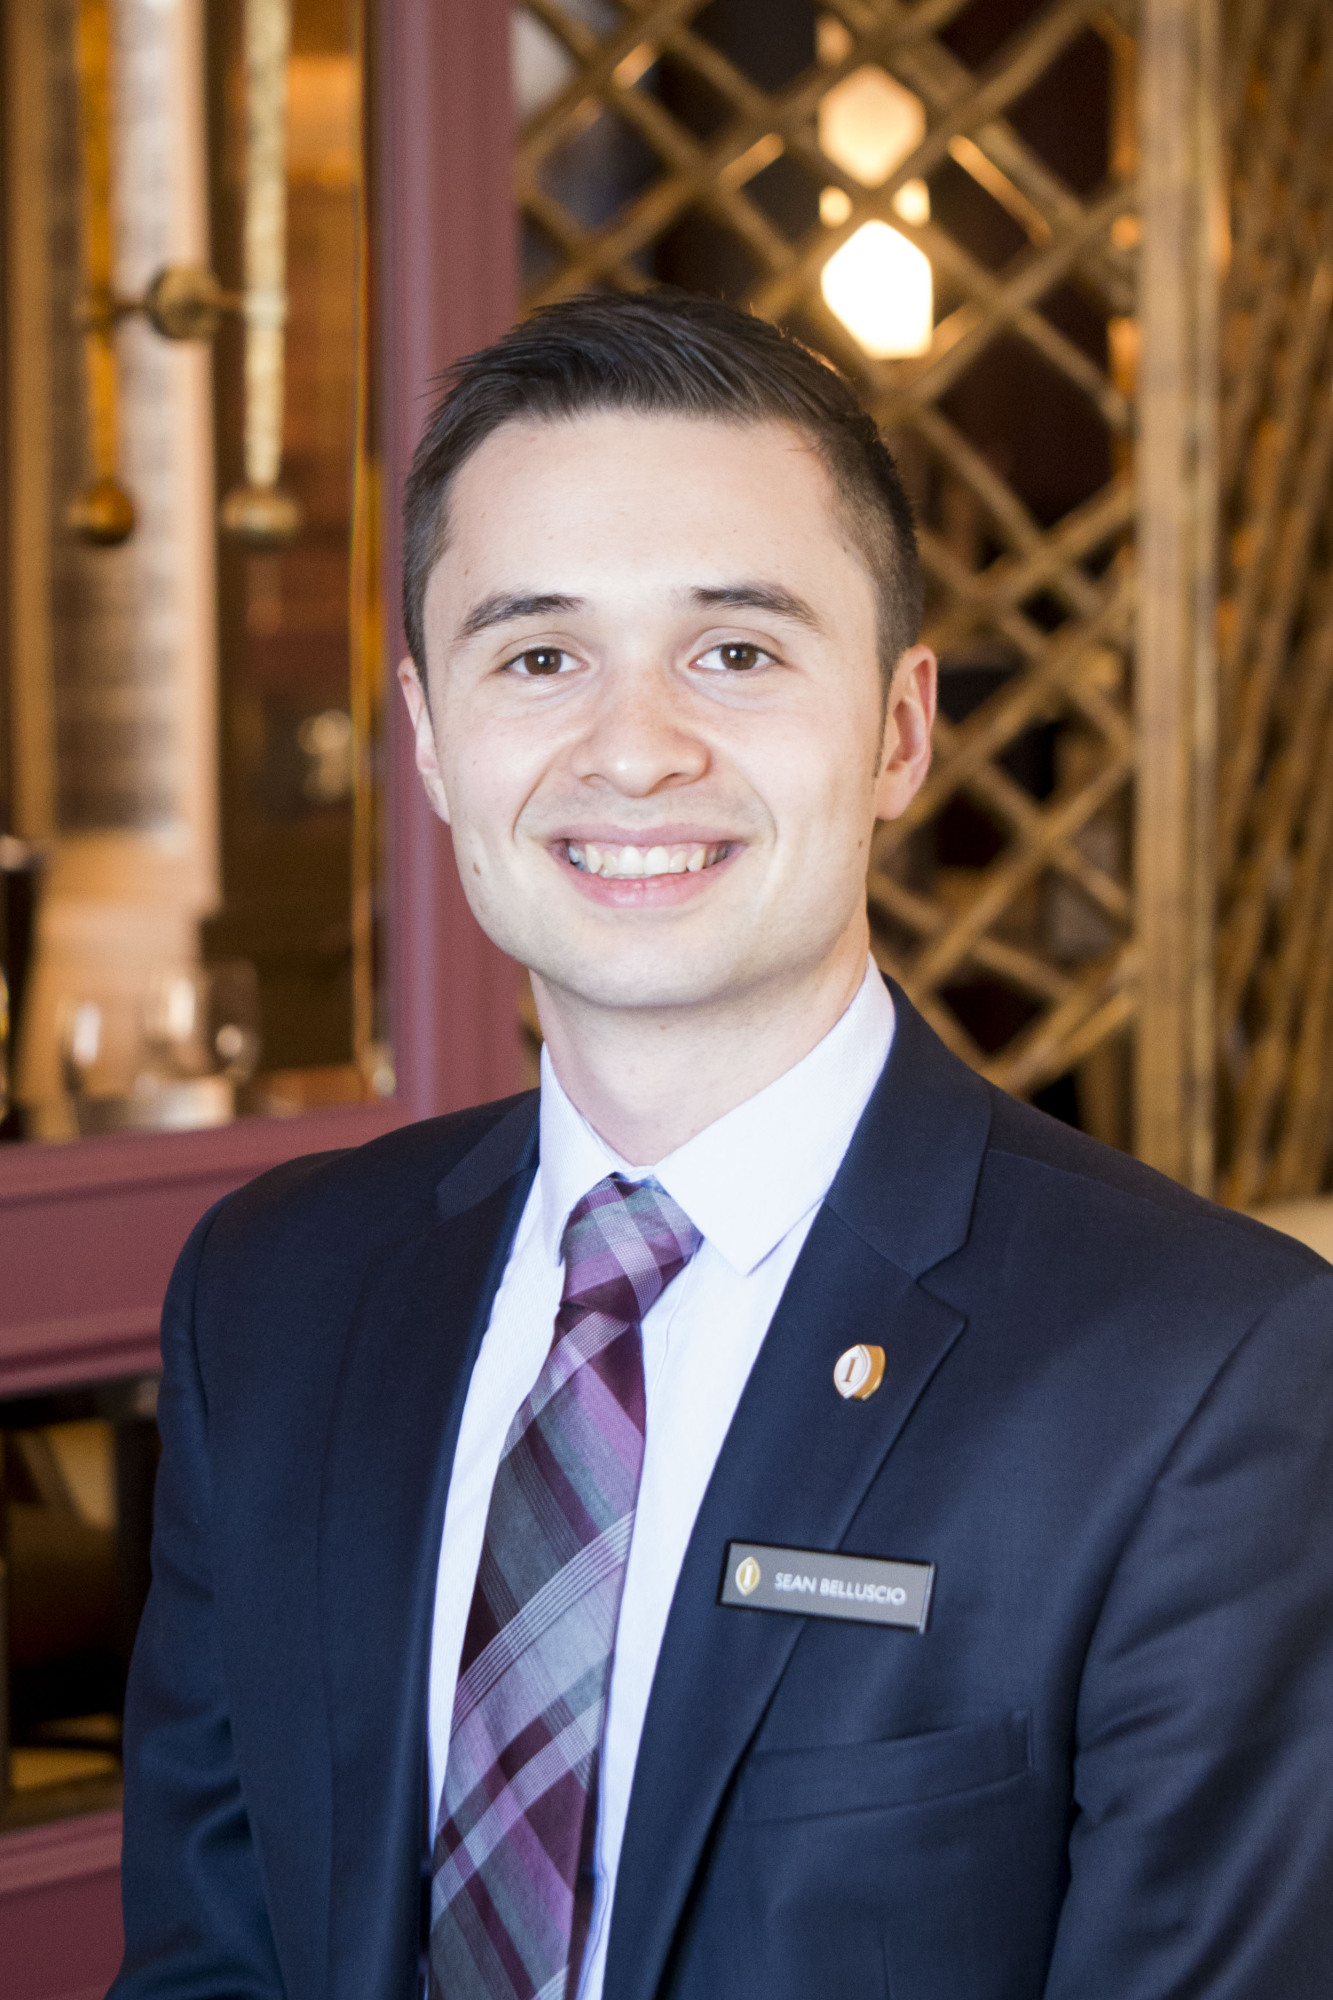 Sean Belluscio Has Been Promoted Front Desk Manager At